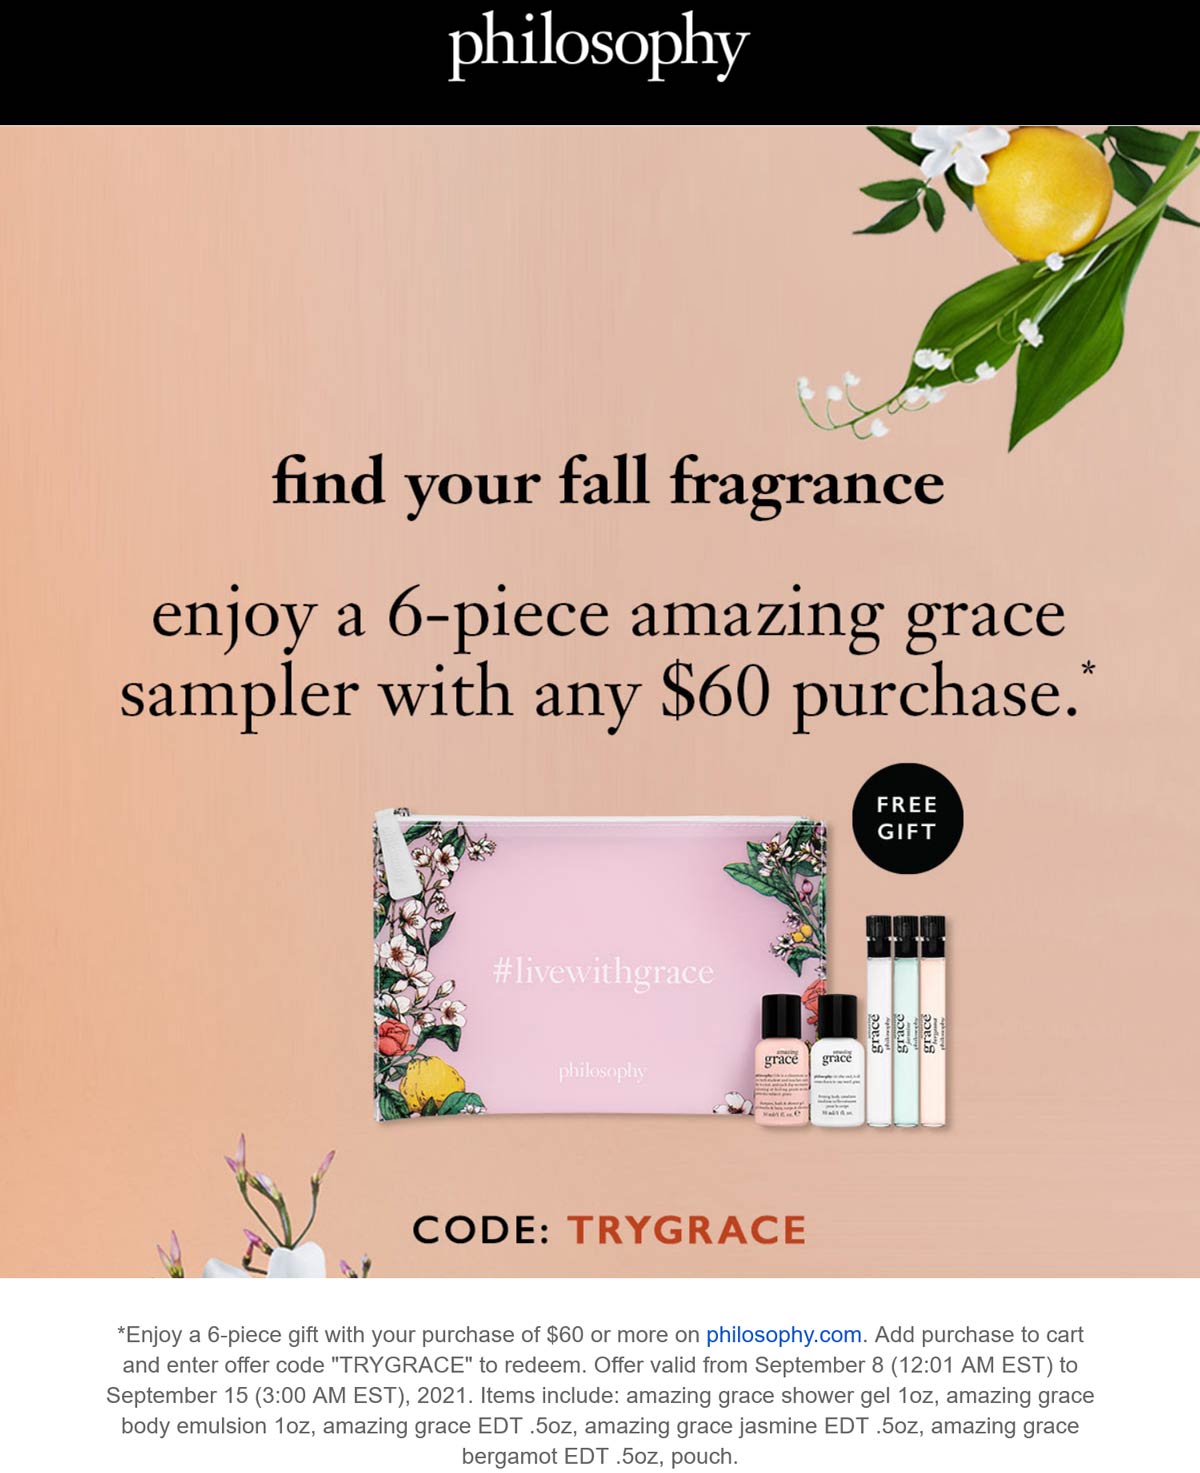 Philosophy stores Coupon  Free 6pc with $60 spent at Philosophy via promo code TRYGRACE #philosophy 